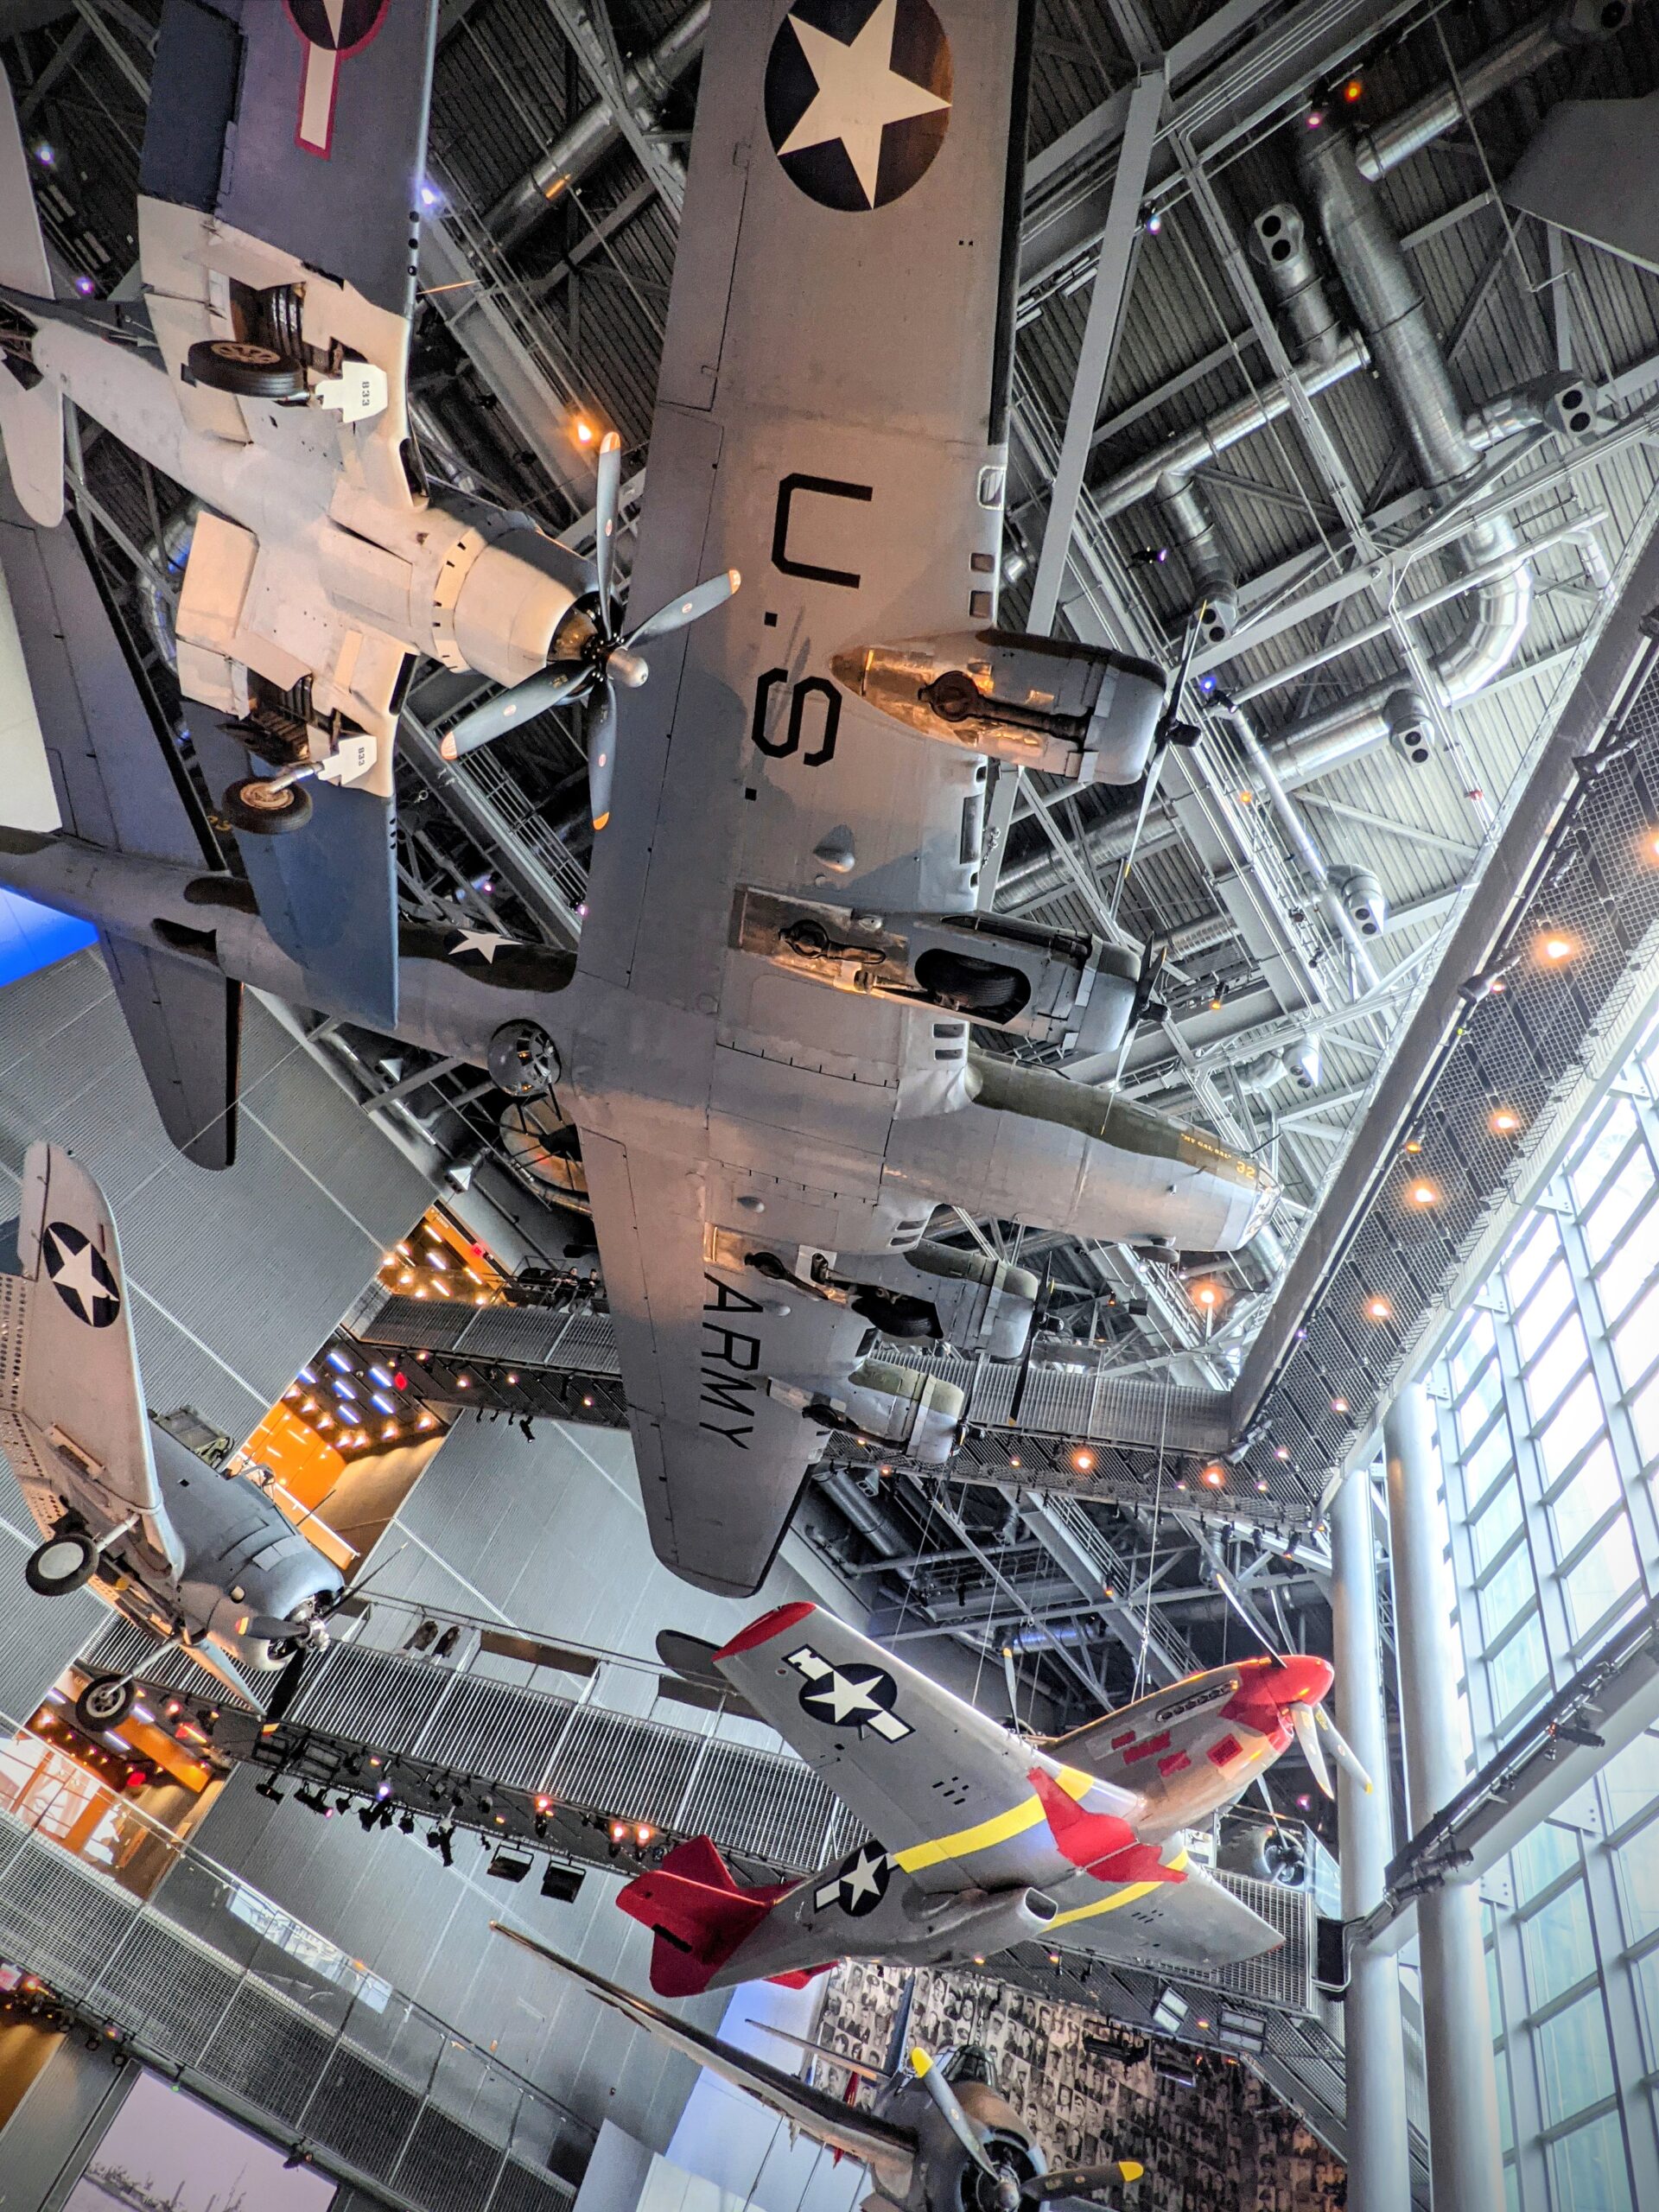 Several floors of historic airplanes at the World War II museum in New Orleans.